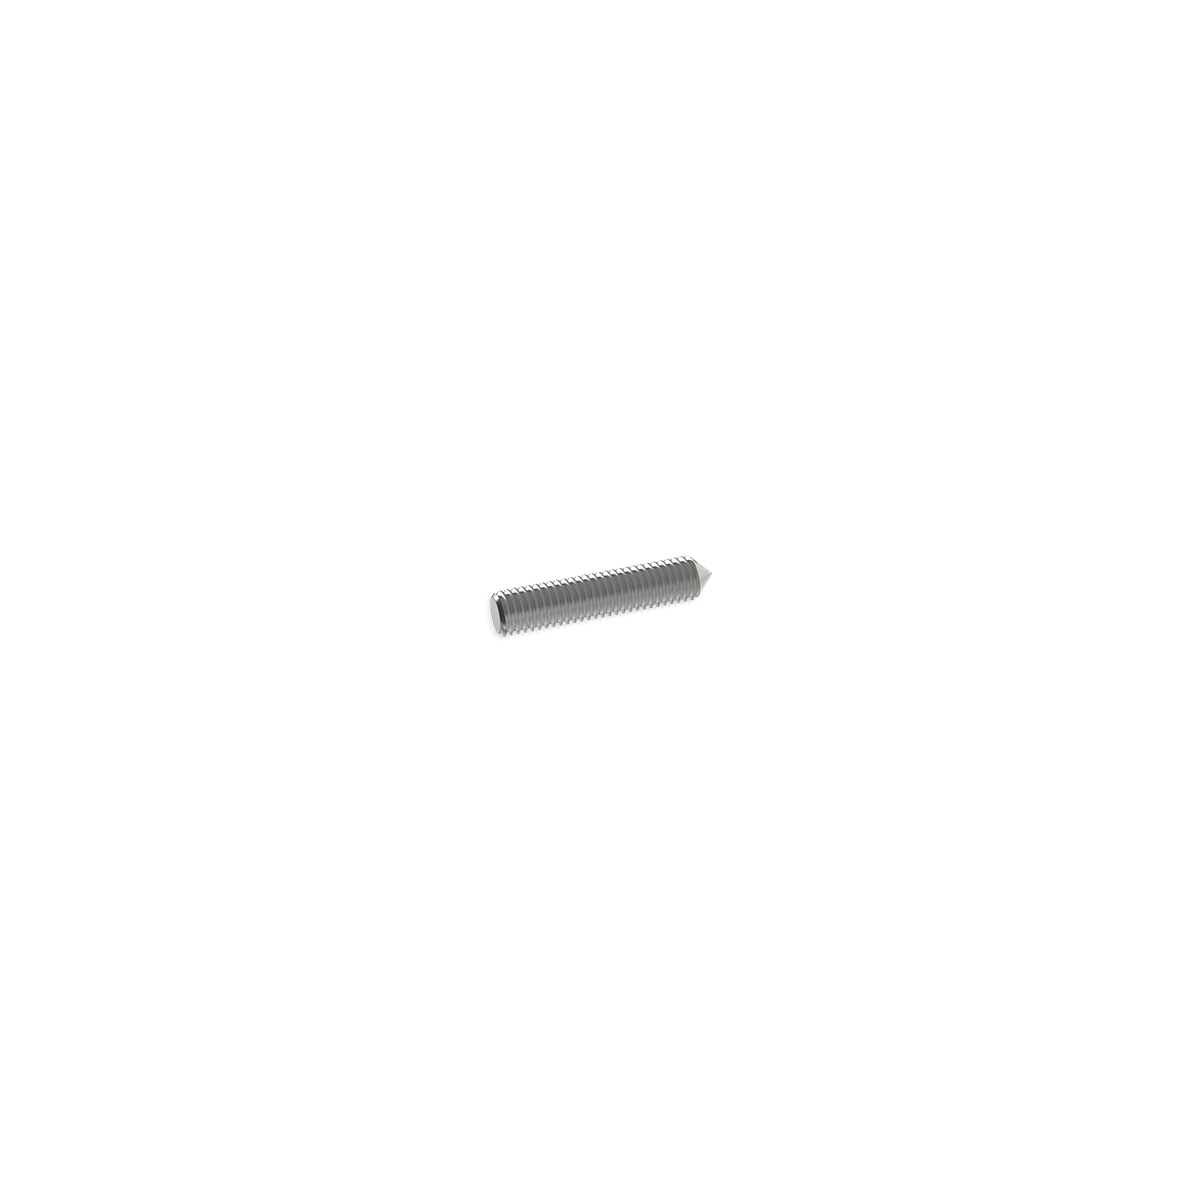 0.11'' Diameter X 1'' Long, Stainless Steel 4-40 Threaded Stud (1 End Flat - 1 End Conical)